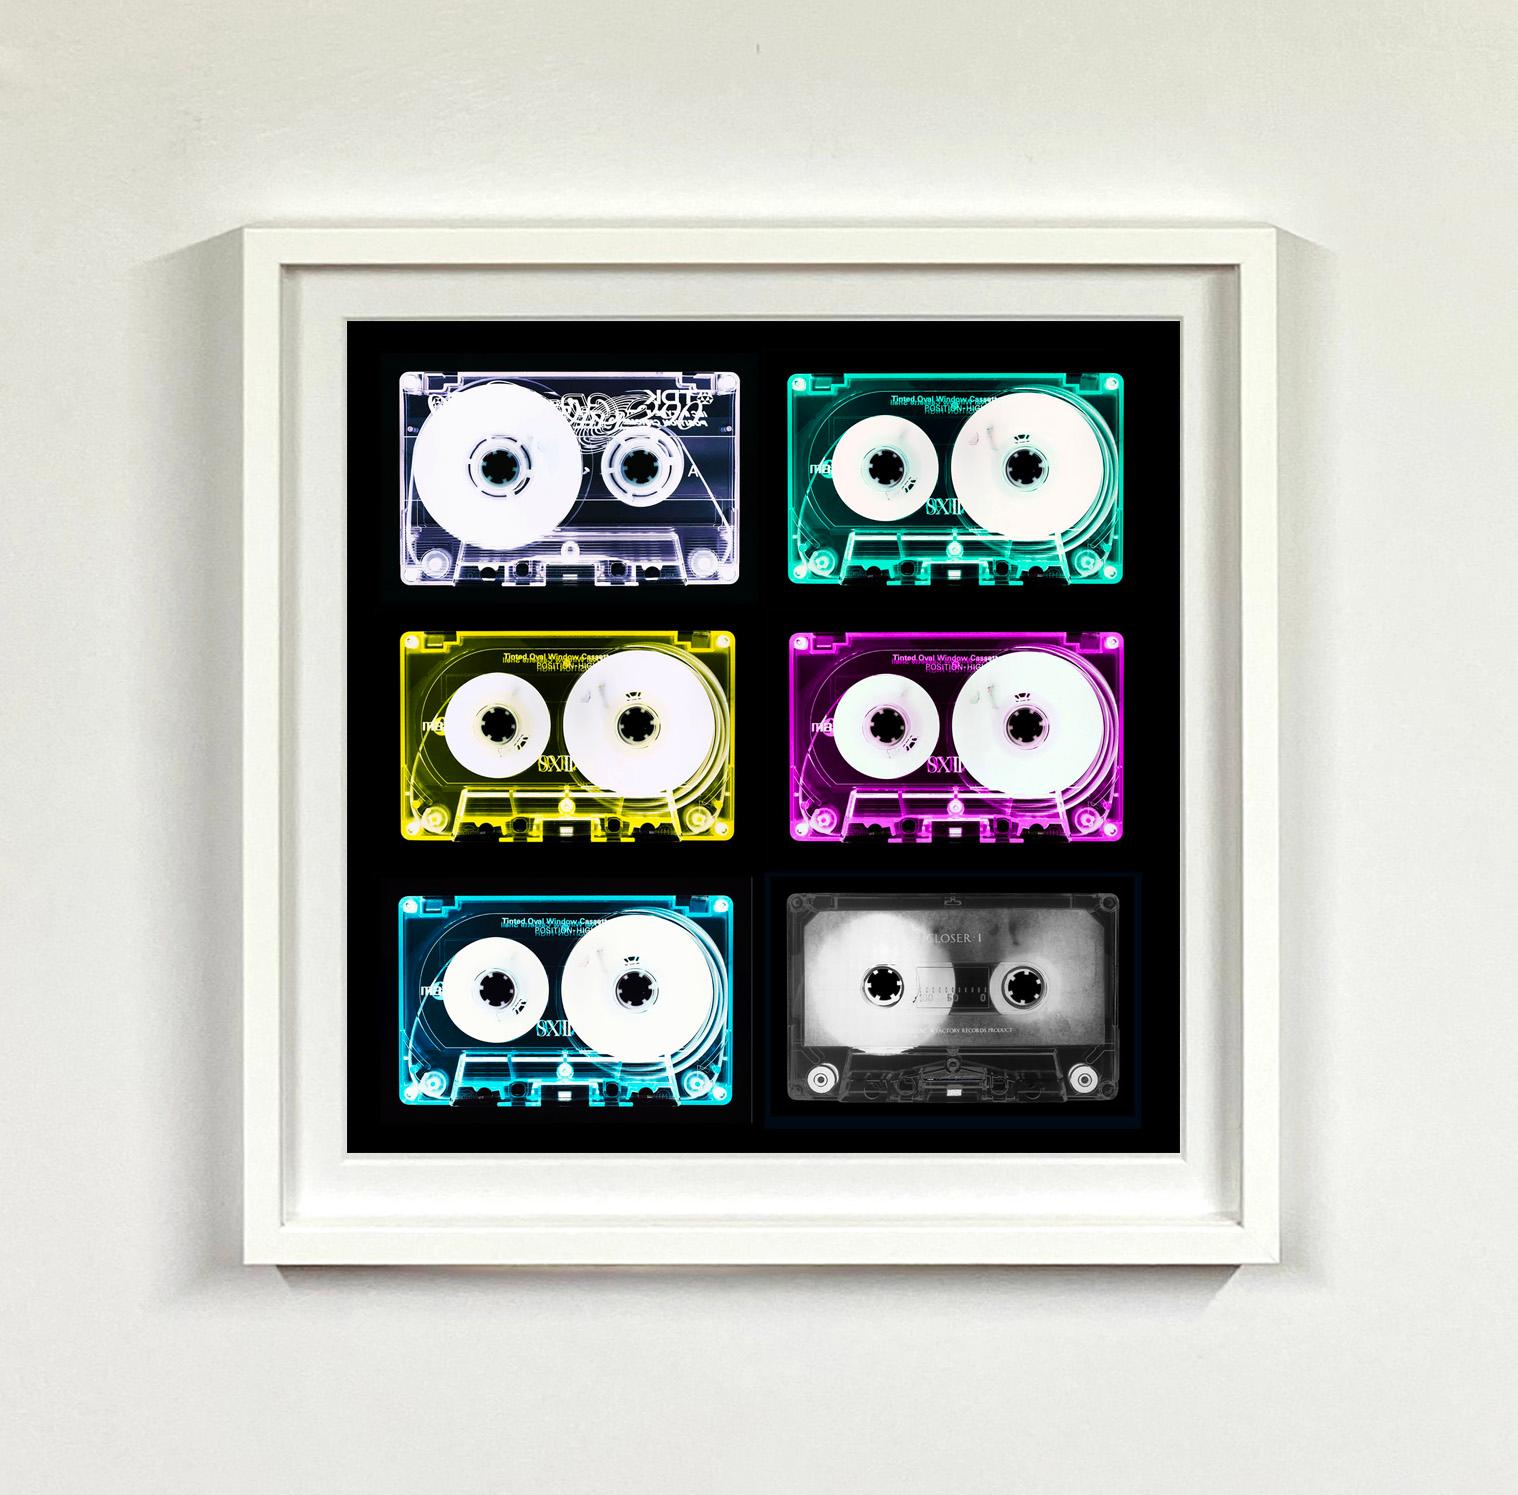 Tape Collection - Contemporary Pop Art Color Photography - Black Print by Heidler & Heeps